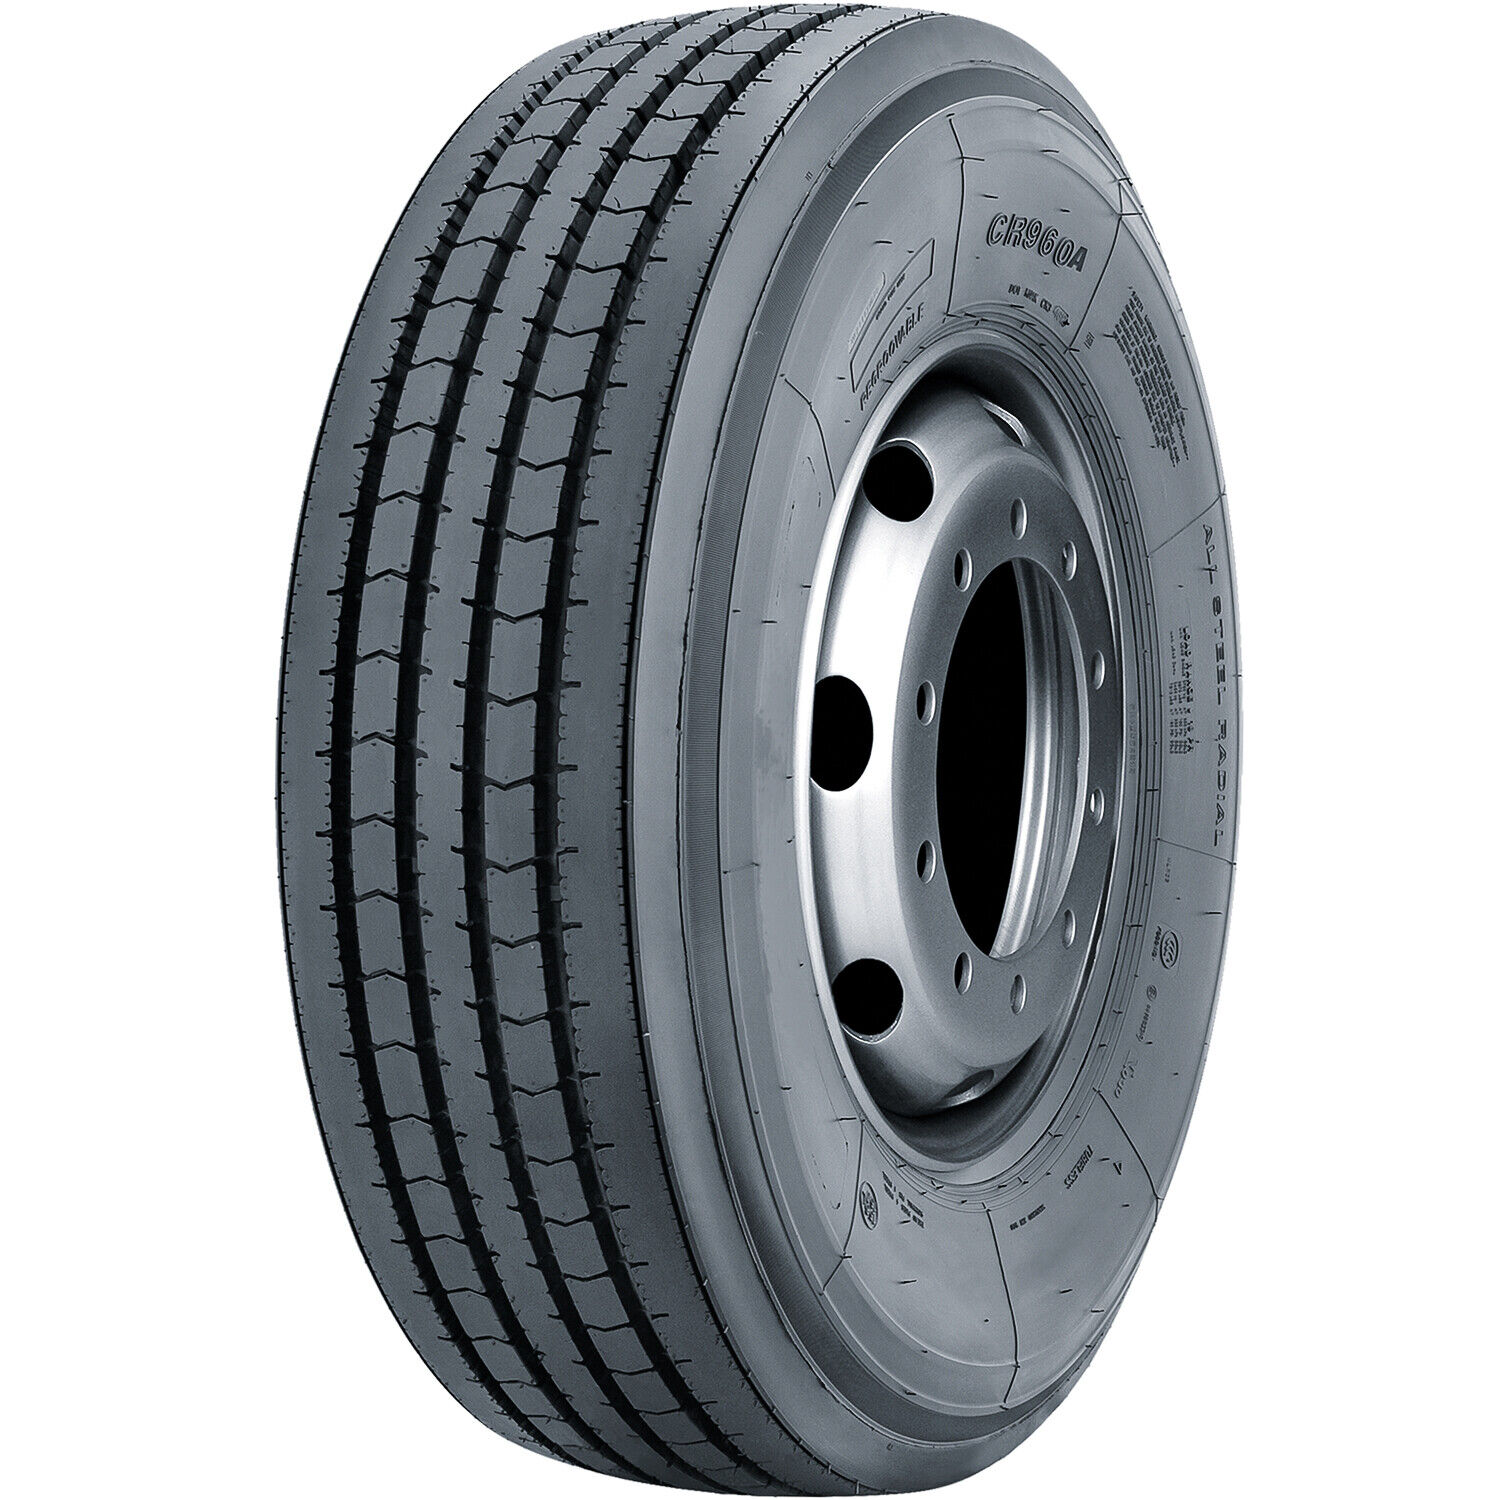 Tire Westlake CR960A ST 235/85R16 Load G 14 Ply Trailer